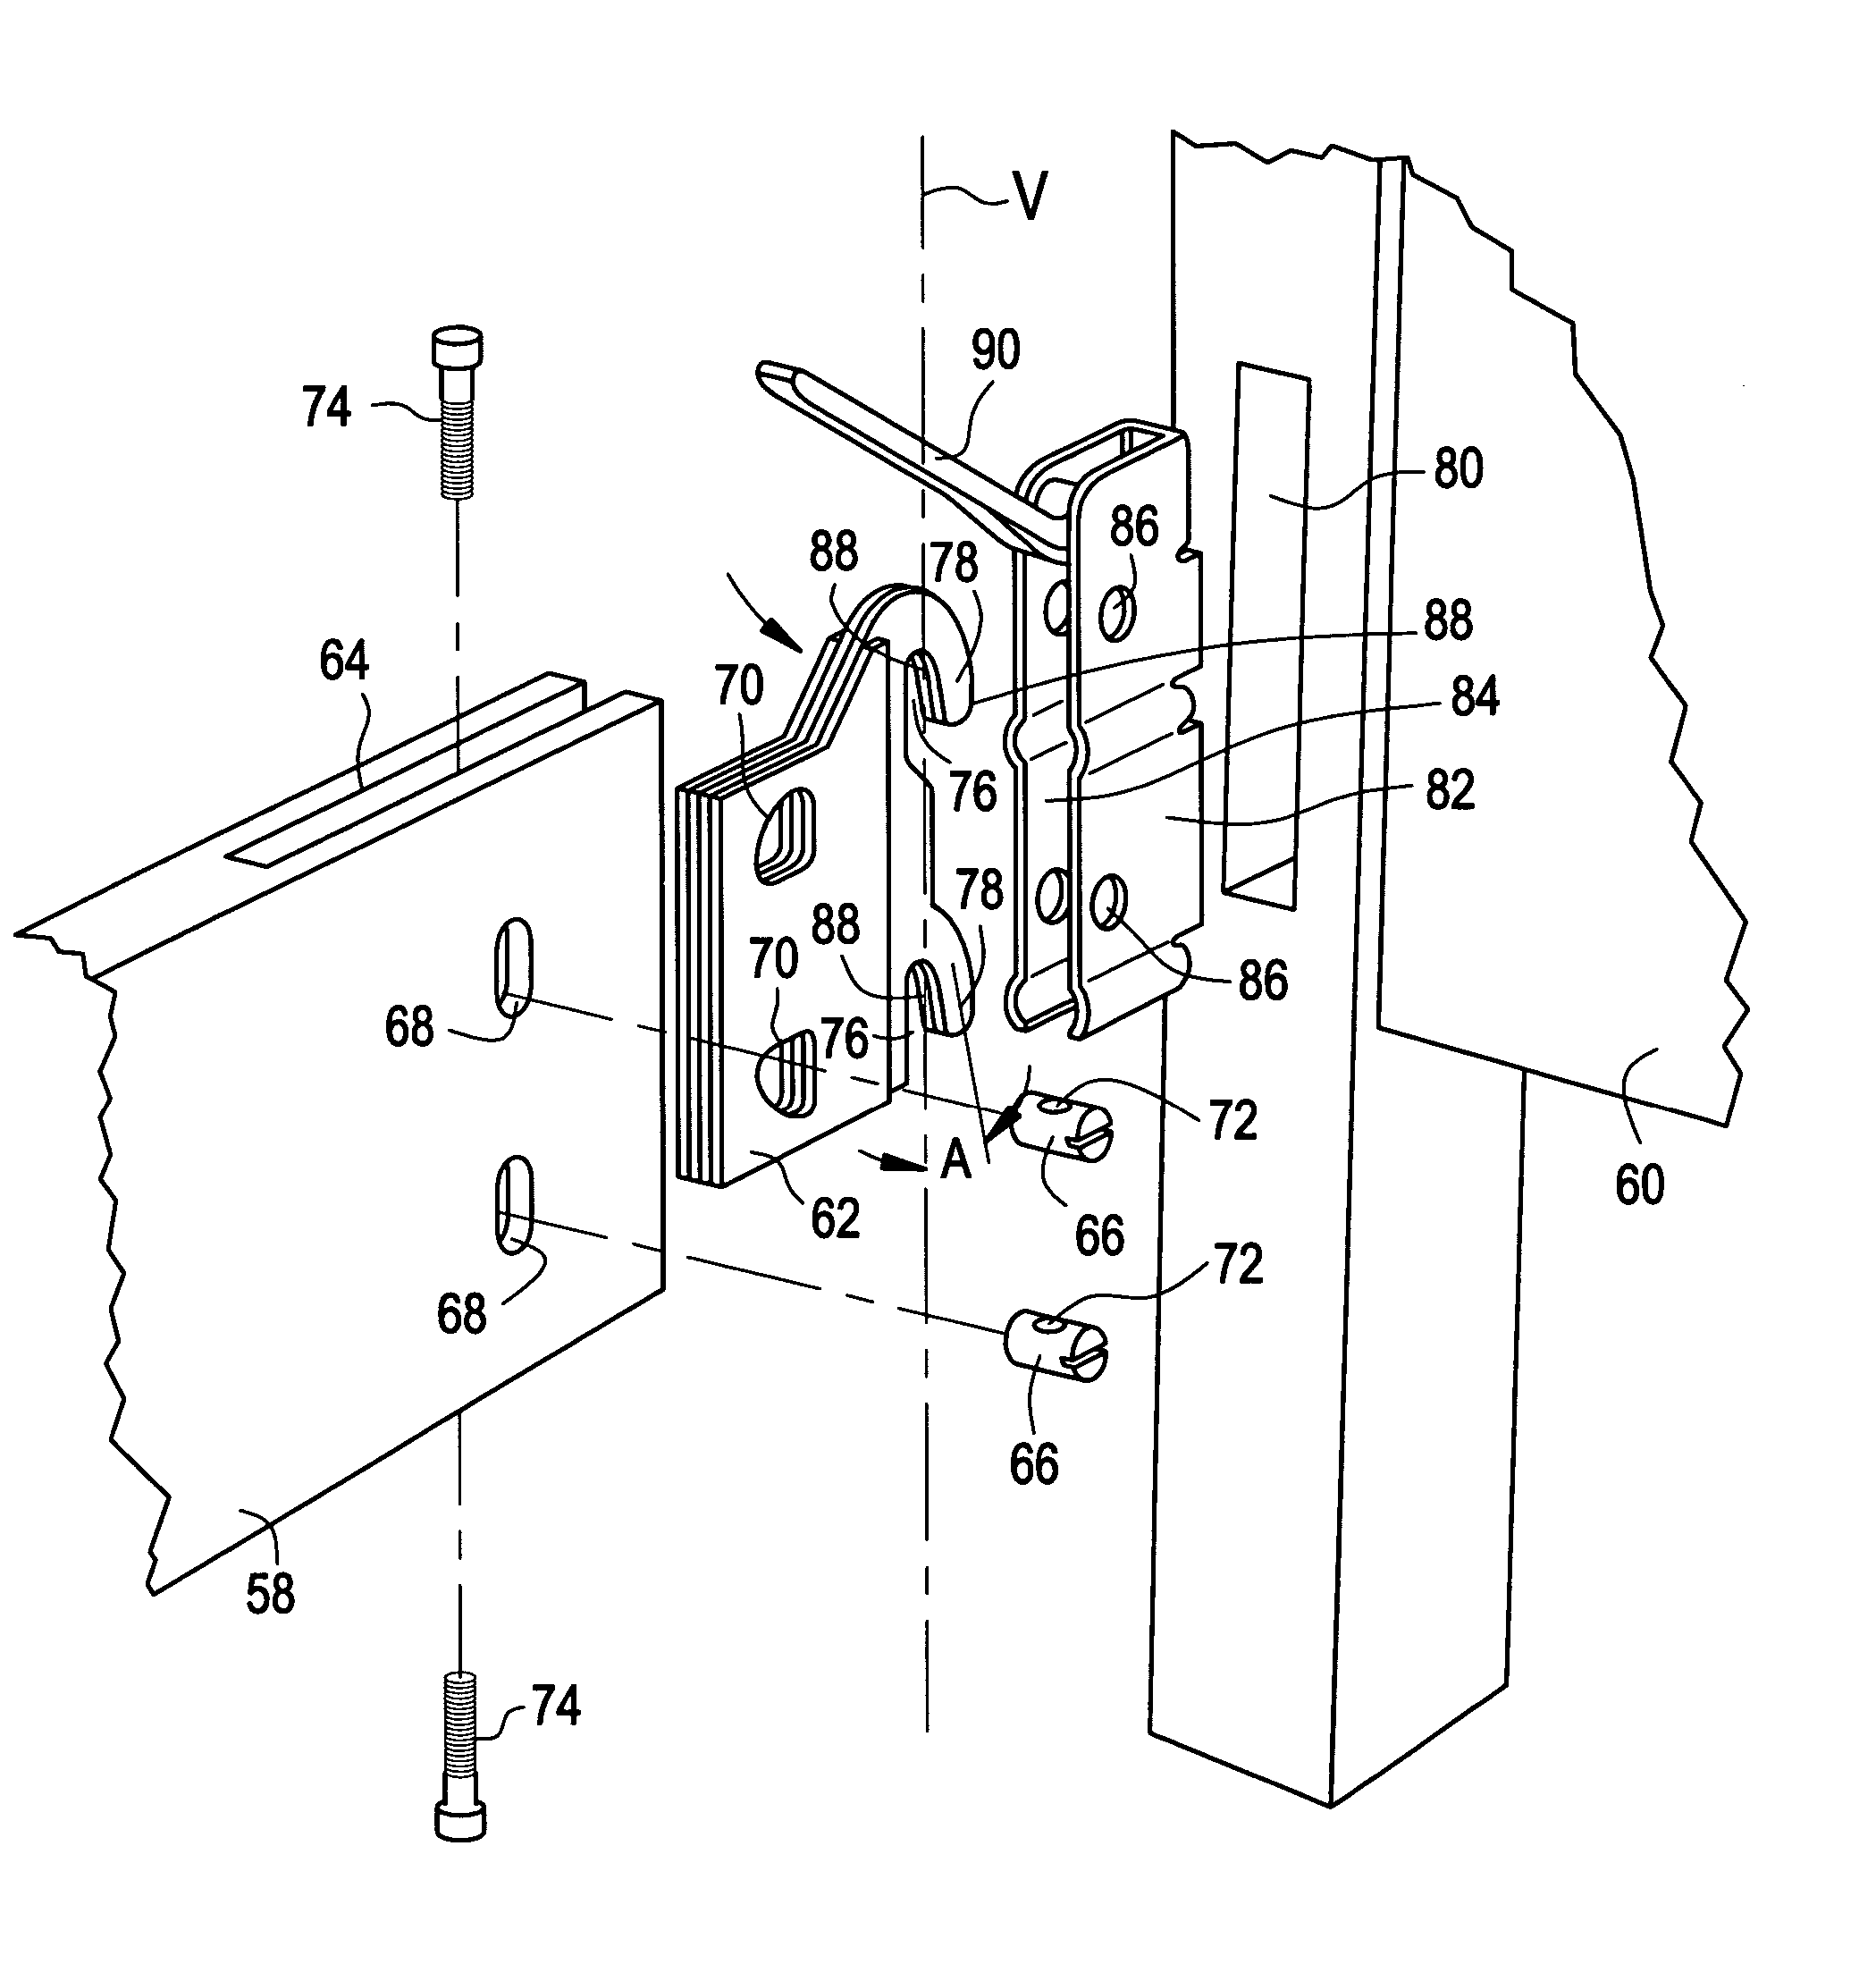 Side rail end connection system for bed frame